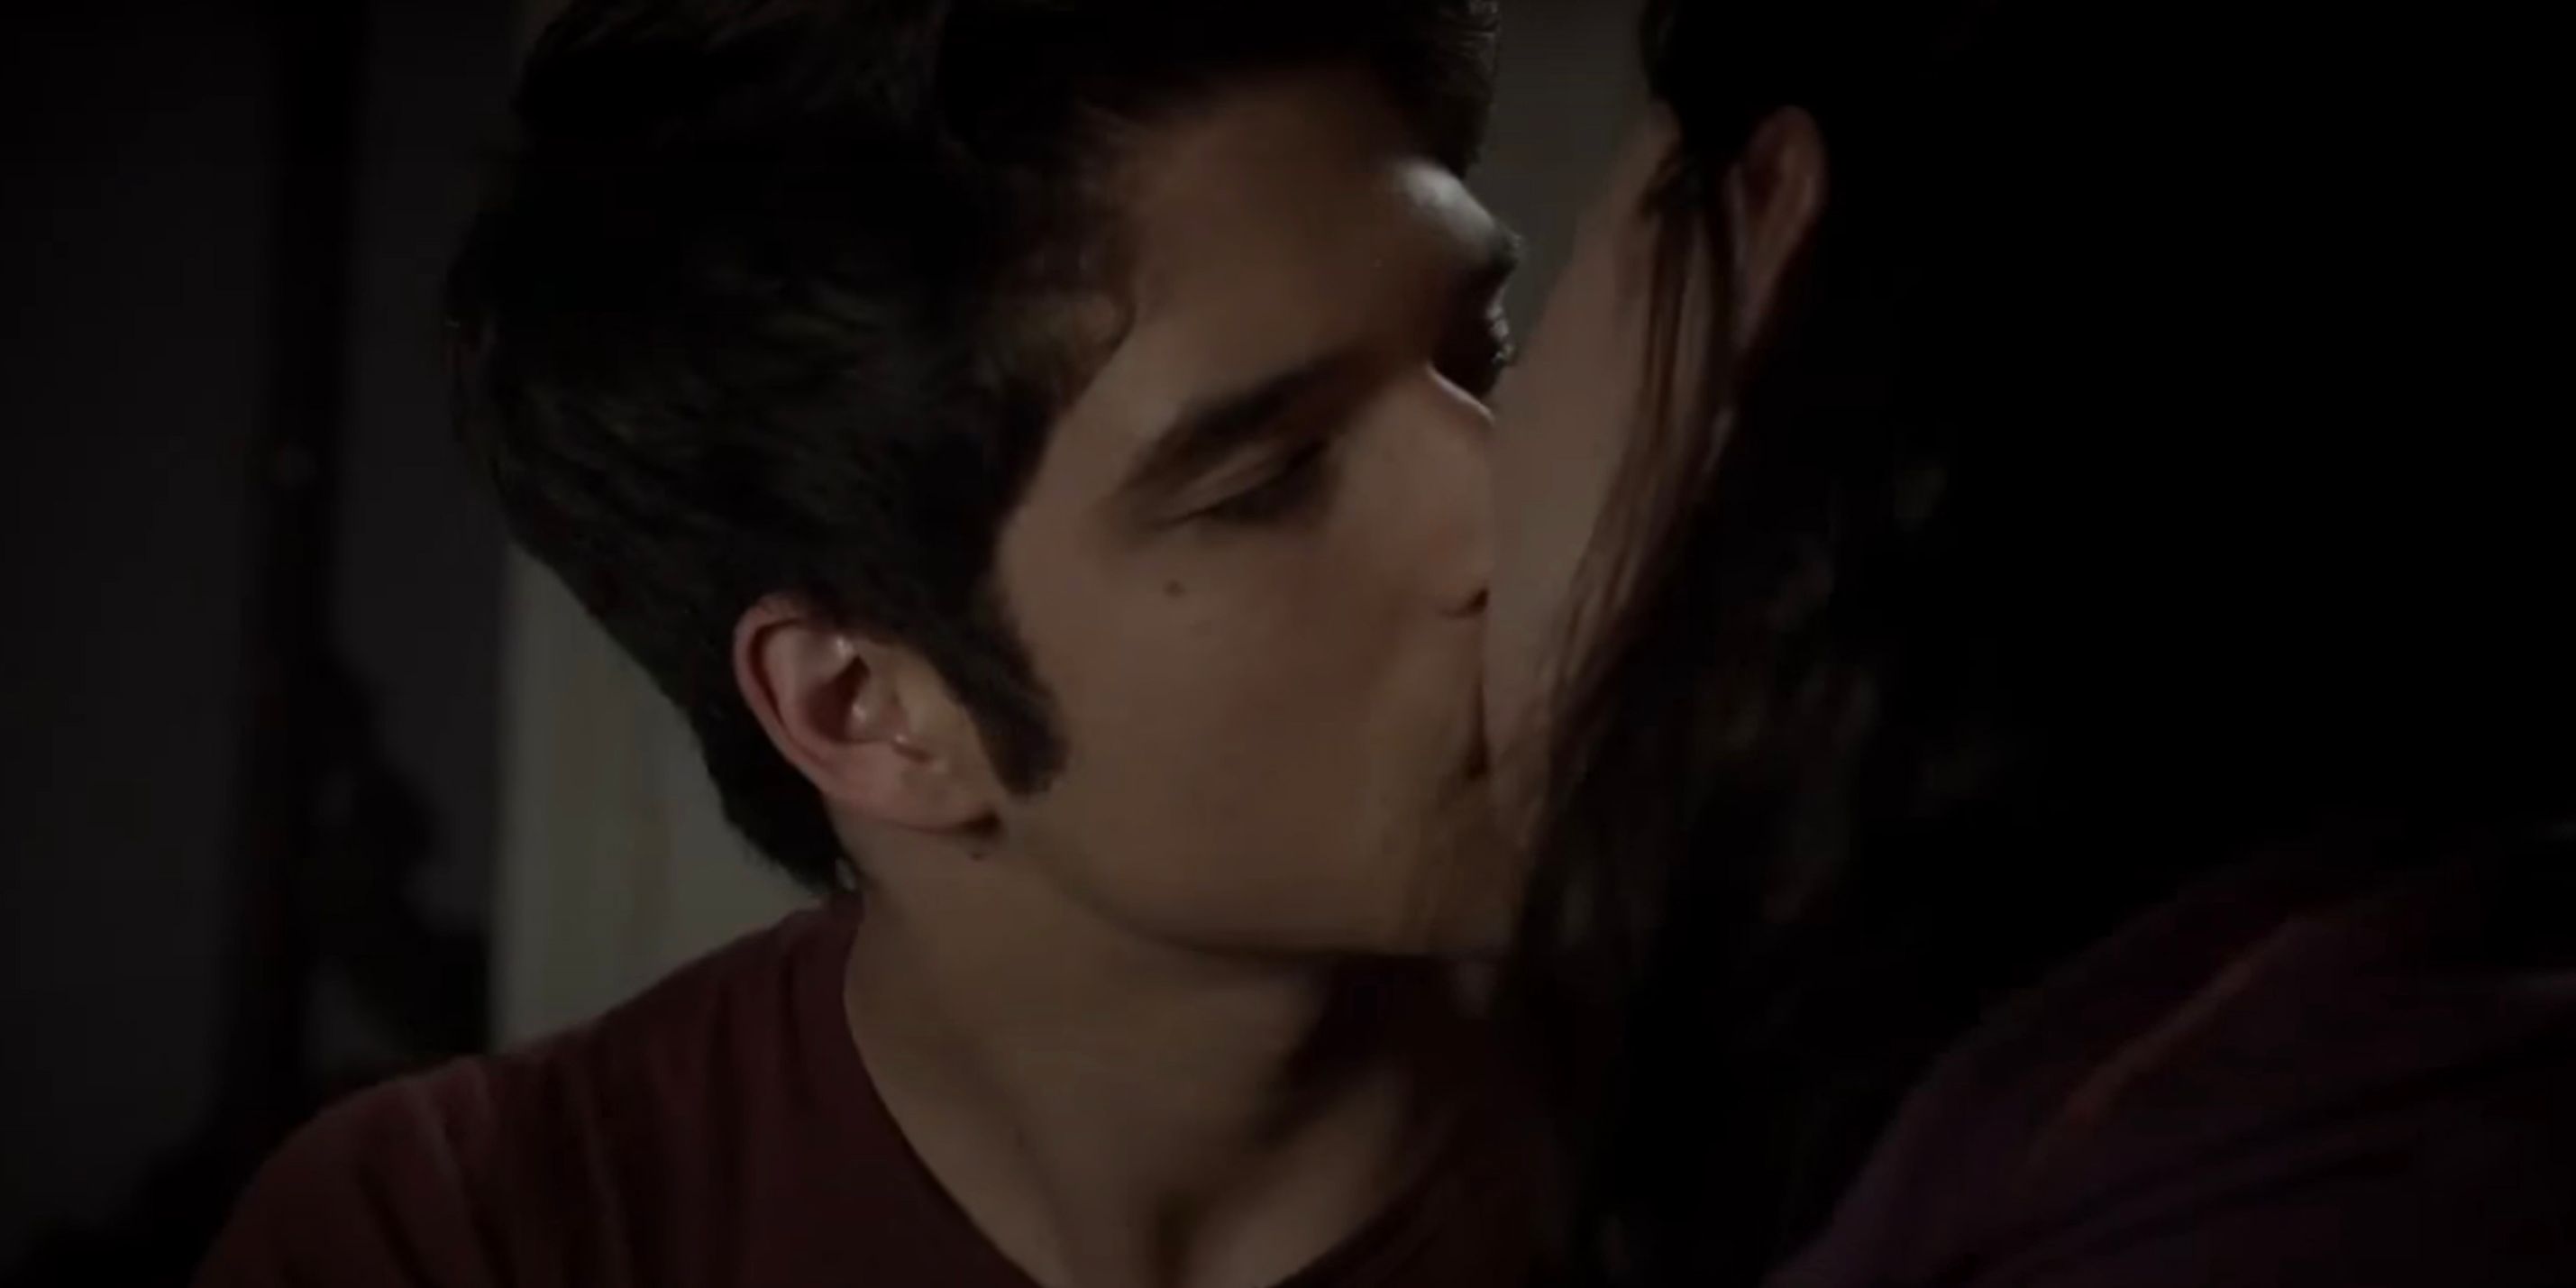 Scott and Allison kiss before they breakup in Teen Wolf.